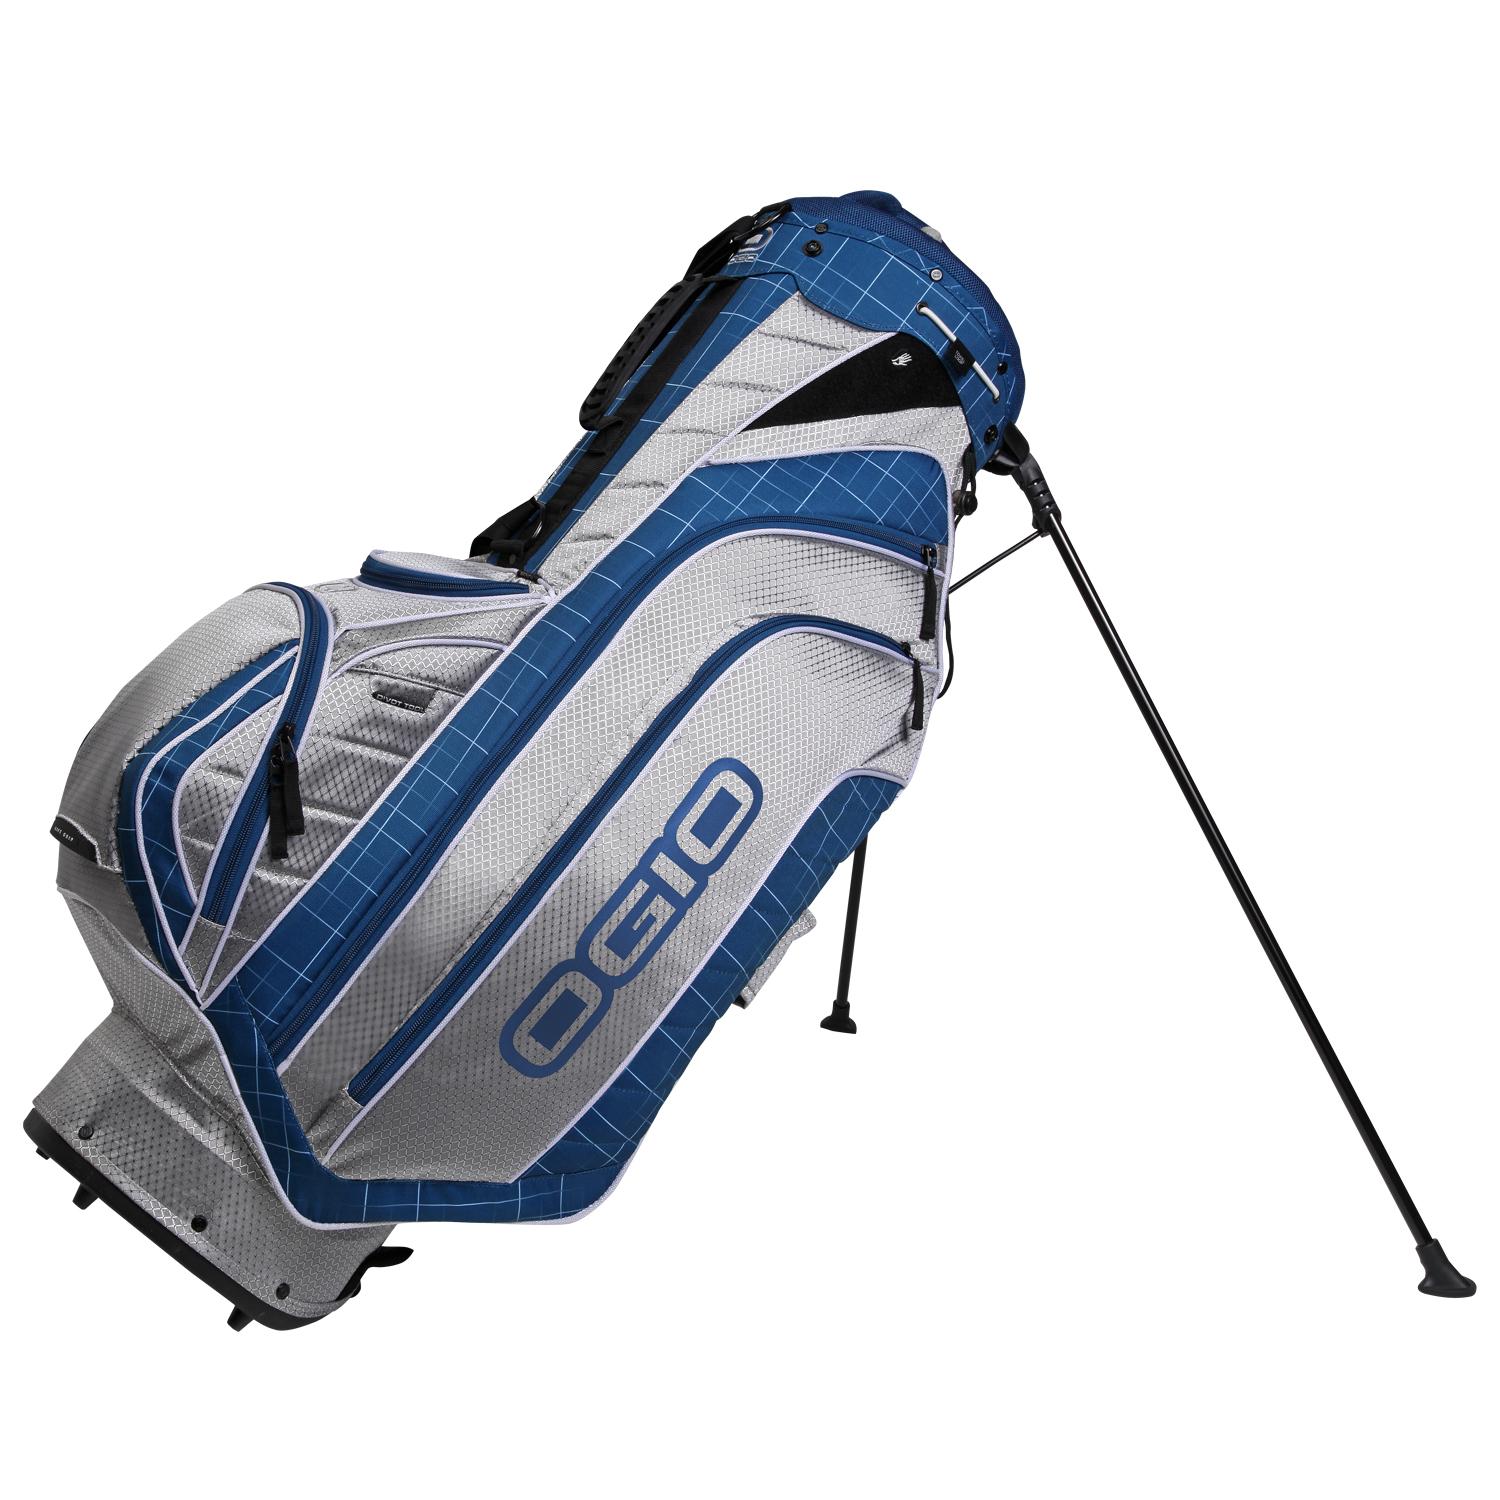 31 Golf Bag Pictures   Free Cliparts That You Can Download To You